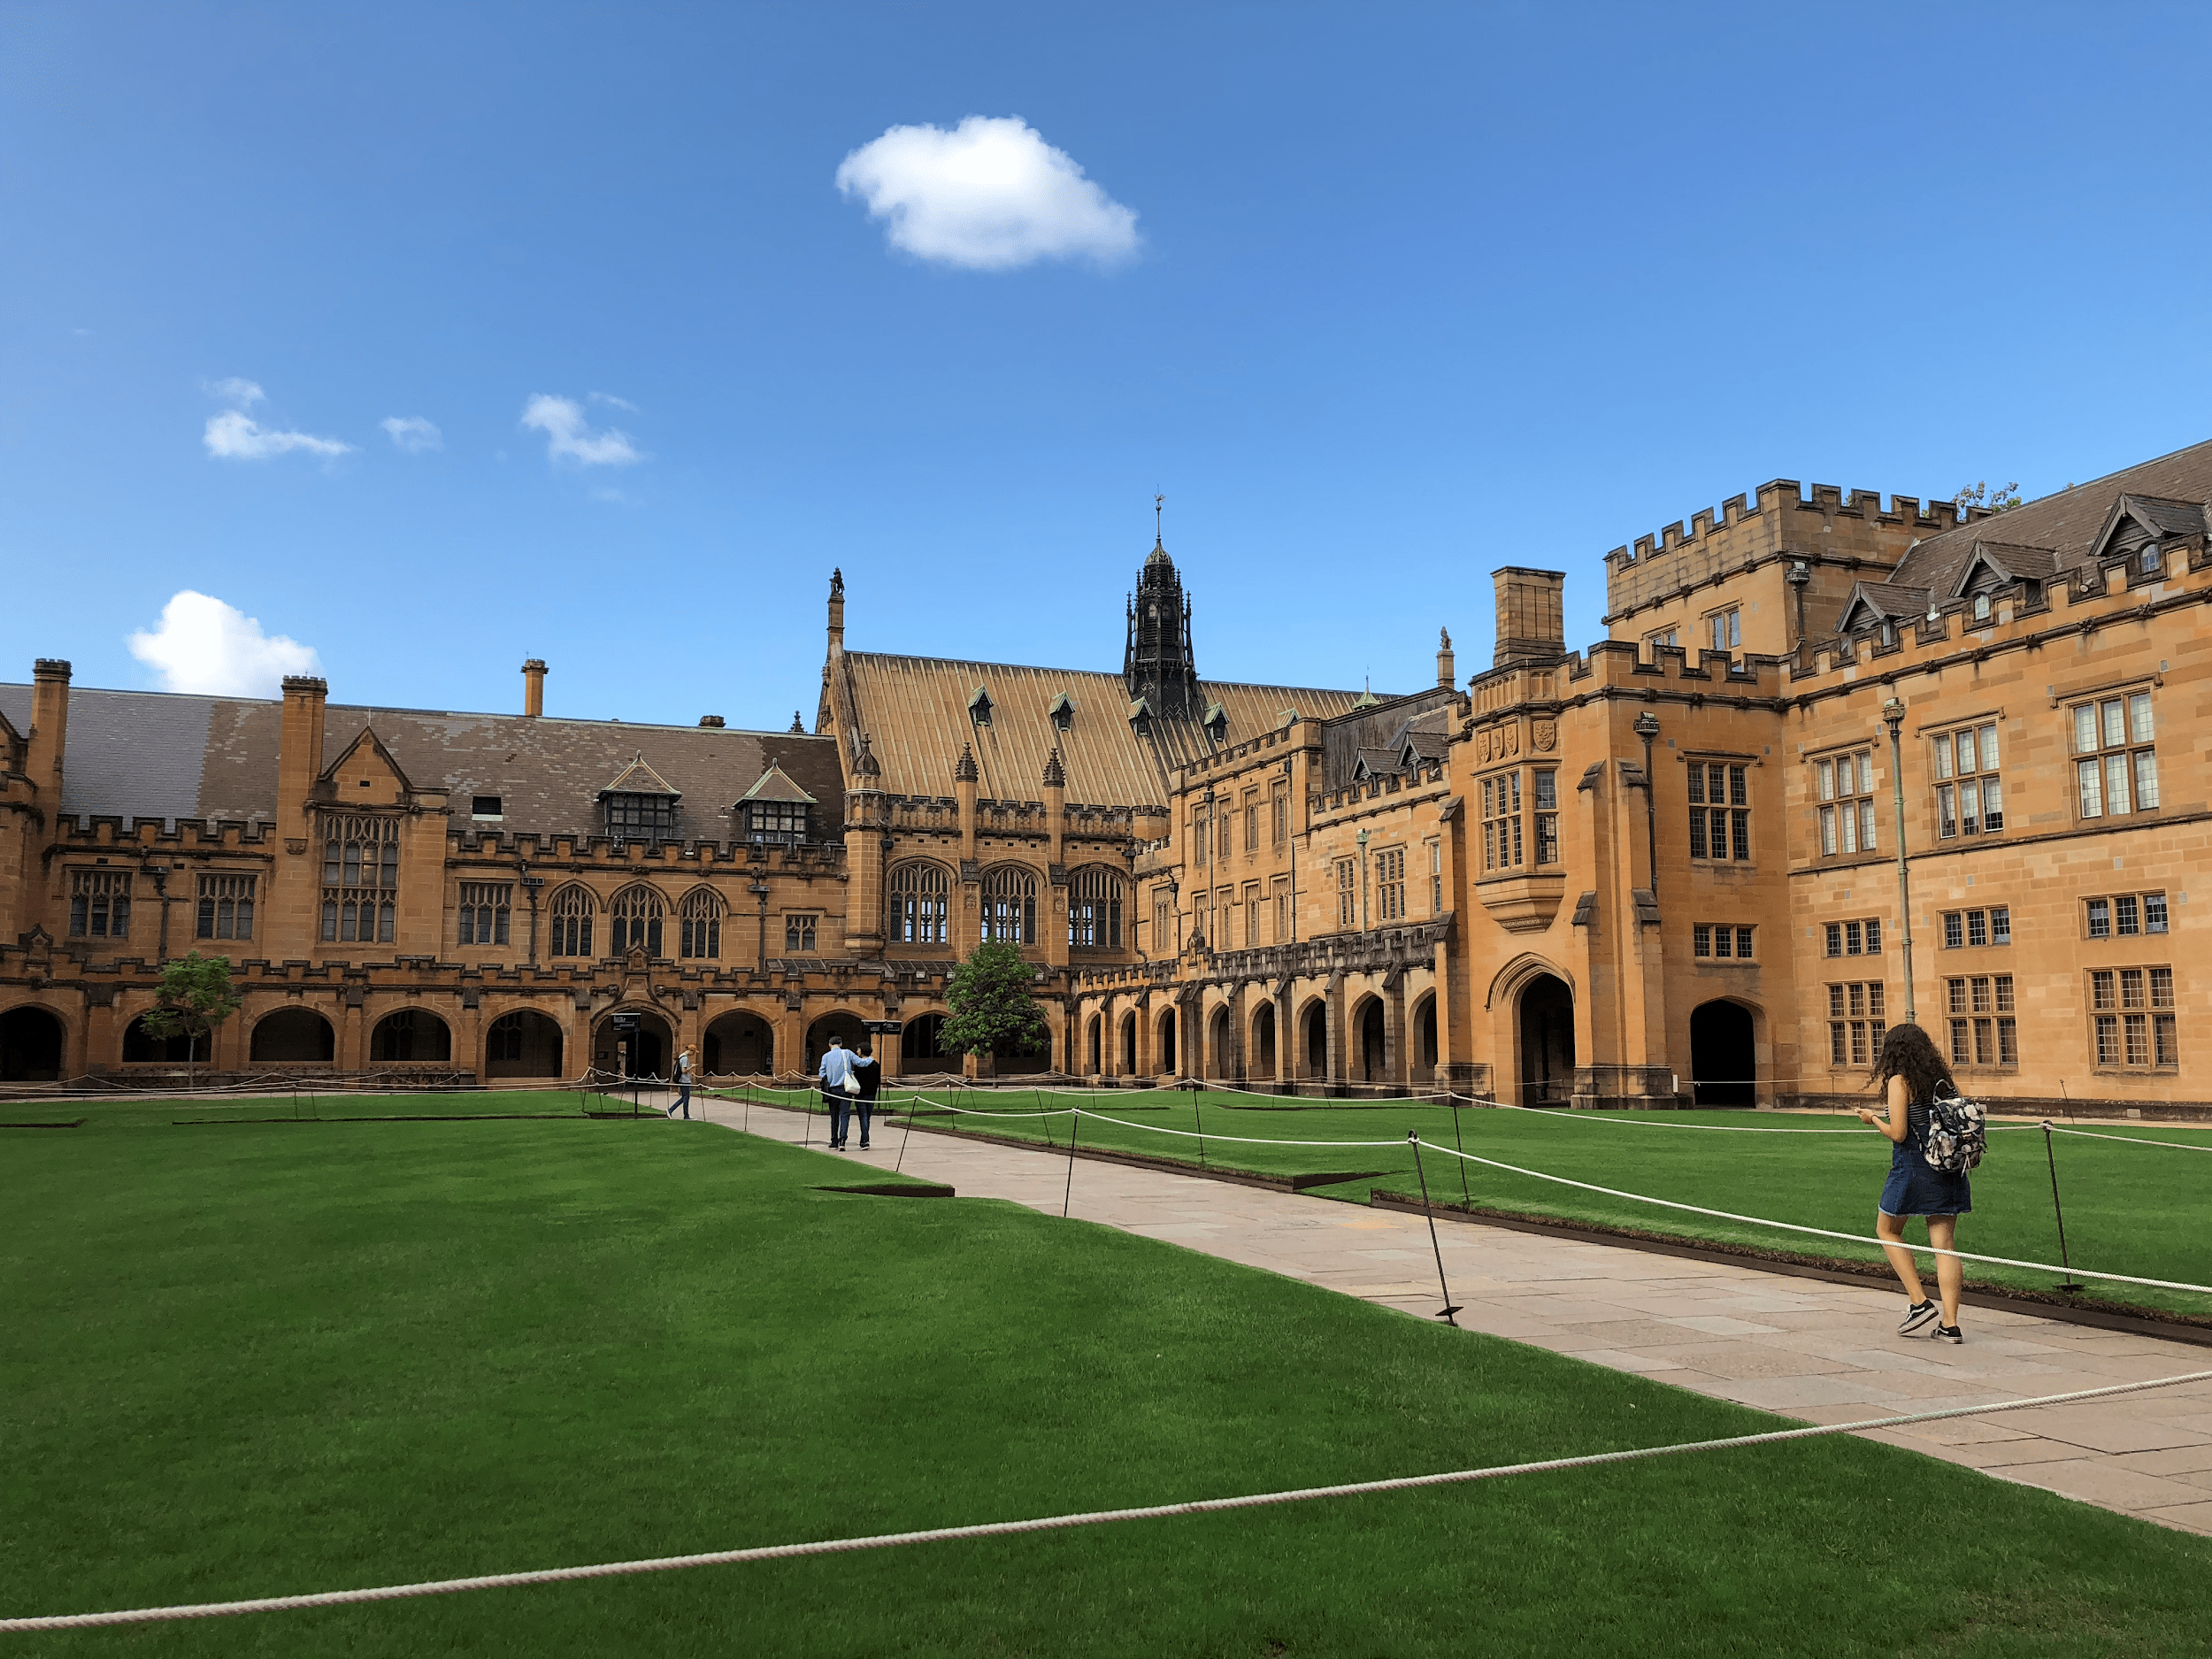 large old building with green grass on university of Sydney campus